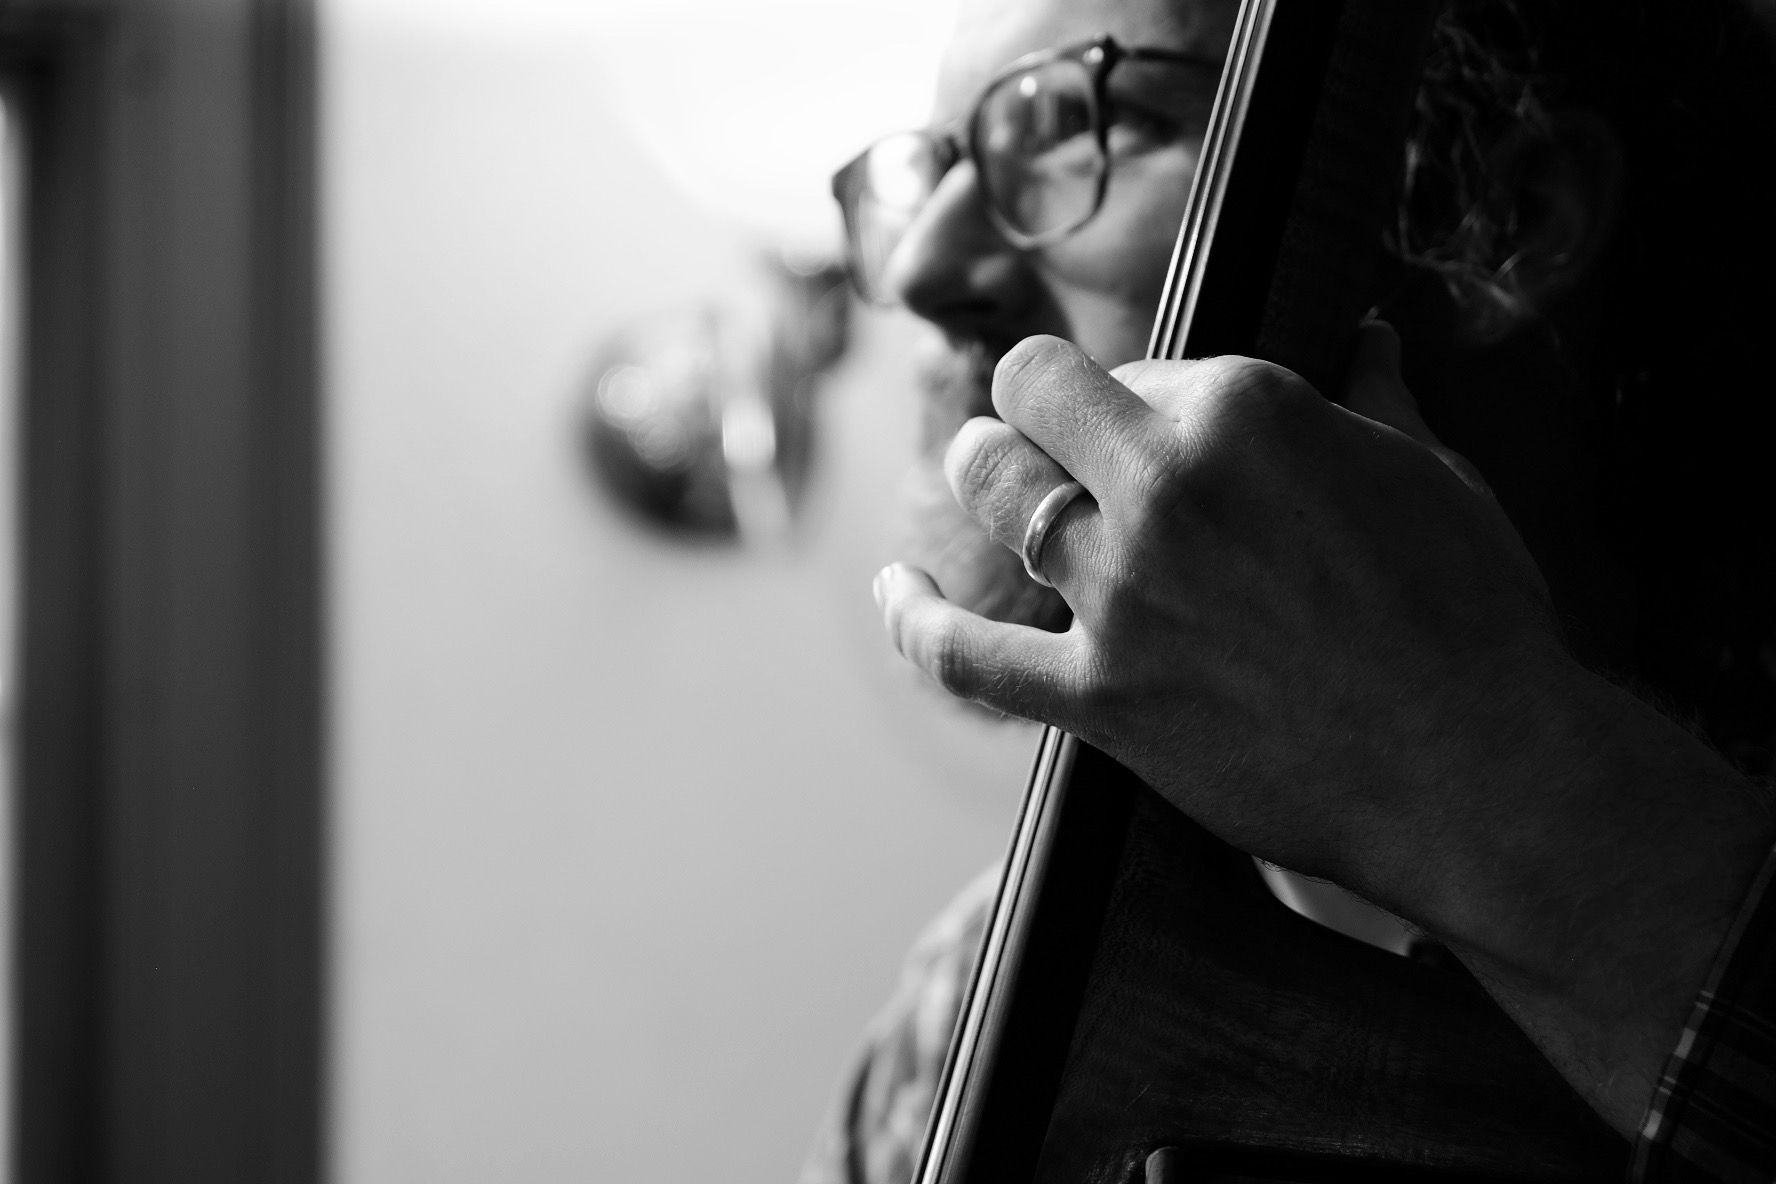 Photo of Evan Premo playing the bass, the focus is on his hand